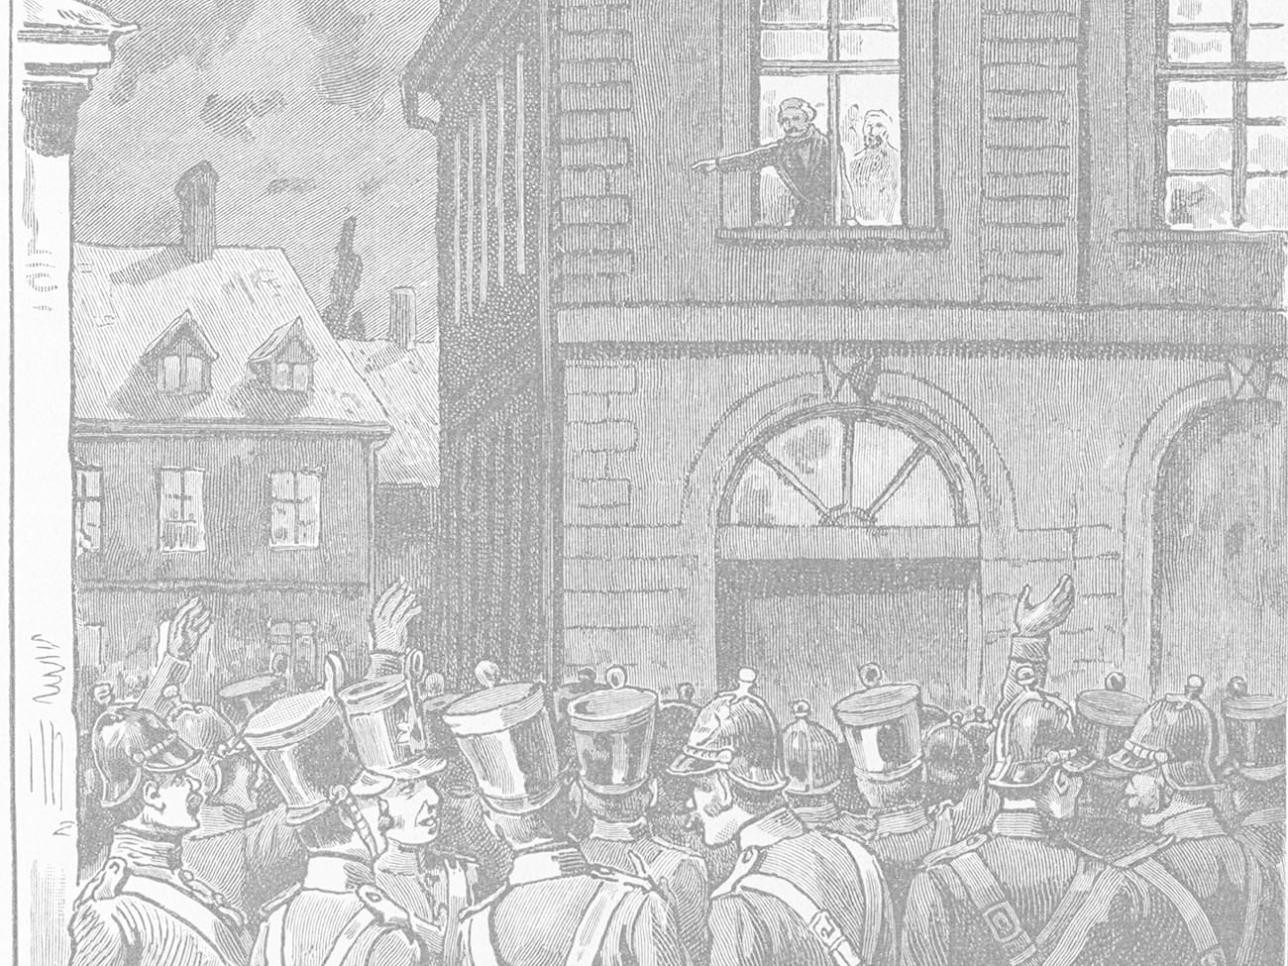 The Baden revolutionary Amand Goegg announces the Offenburg resolutions from a window of Rastatt town hall on May 13, 1849 